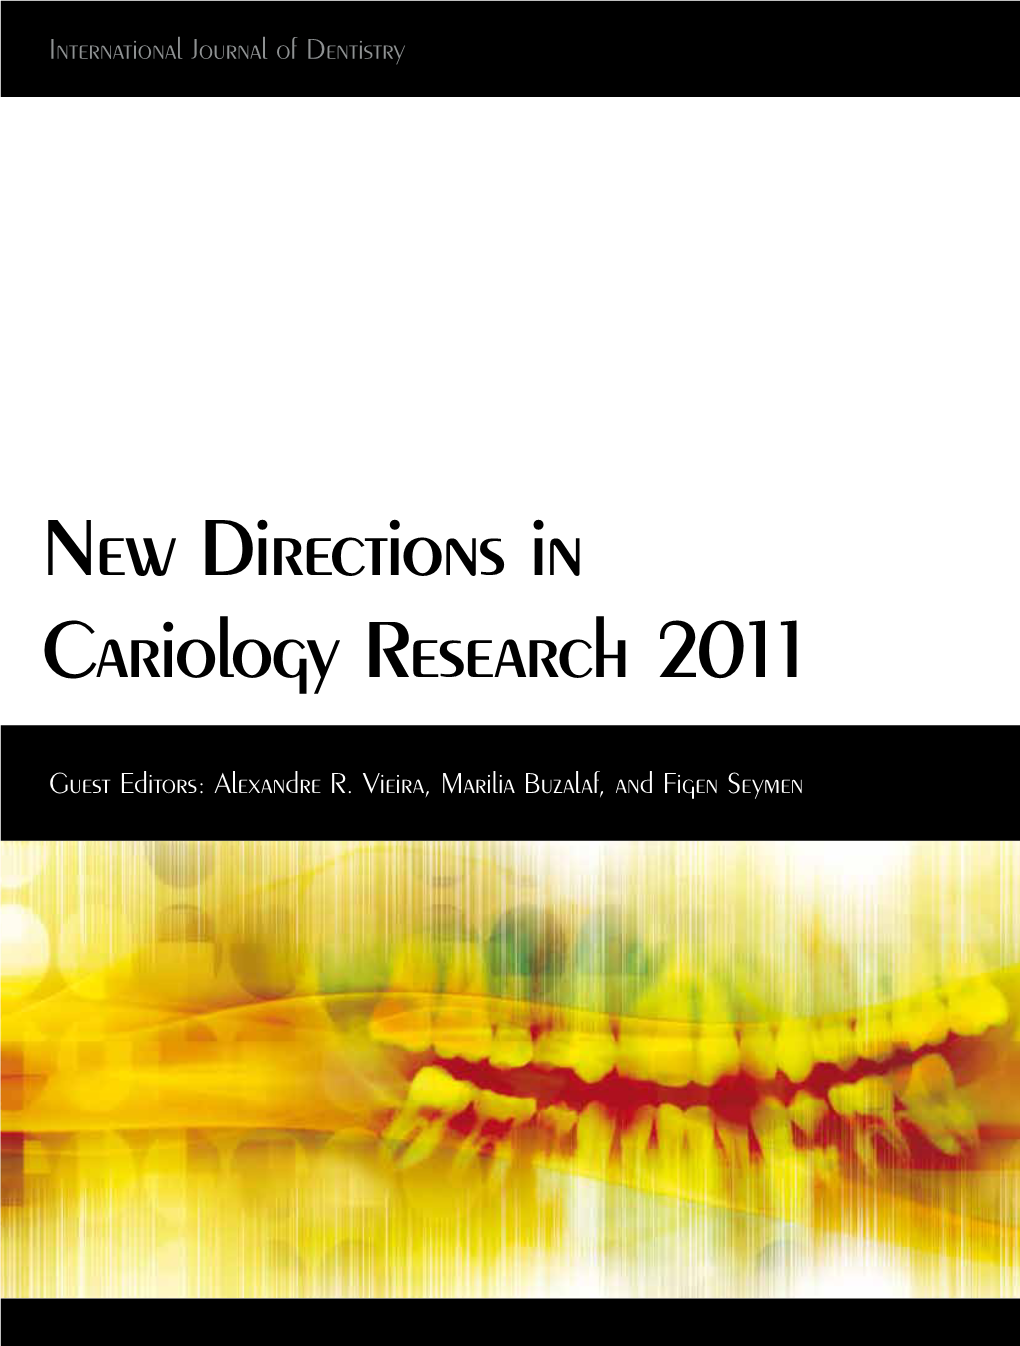 New Directions in Cariology Research 2011